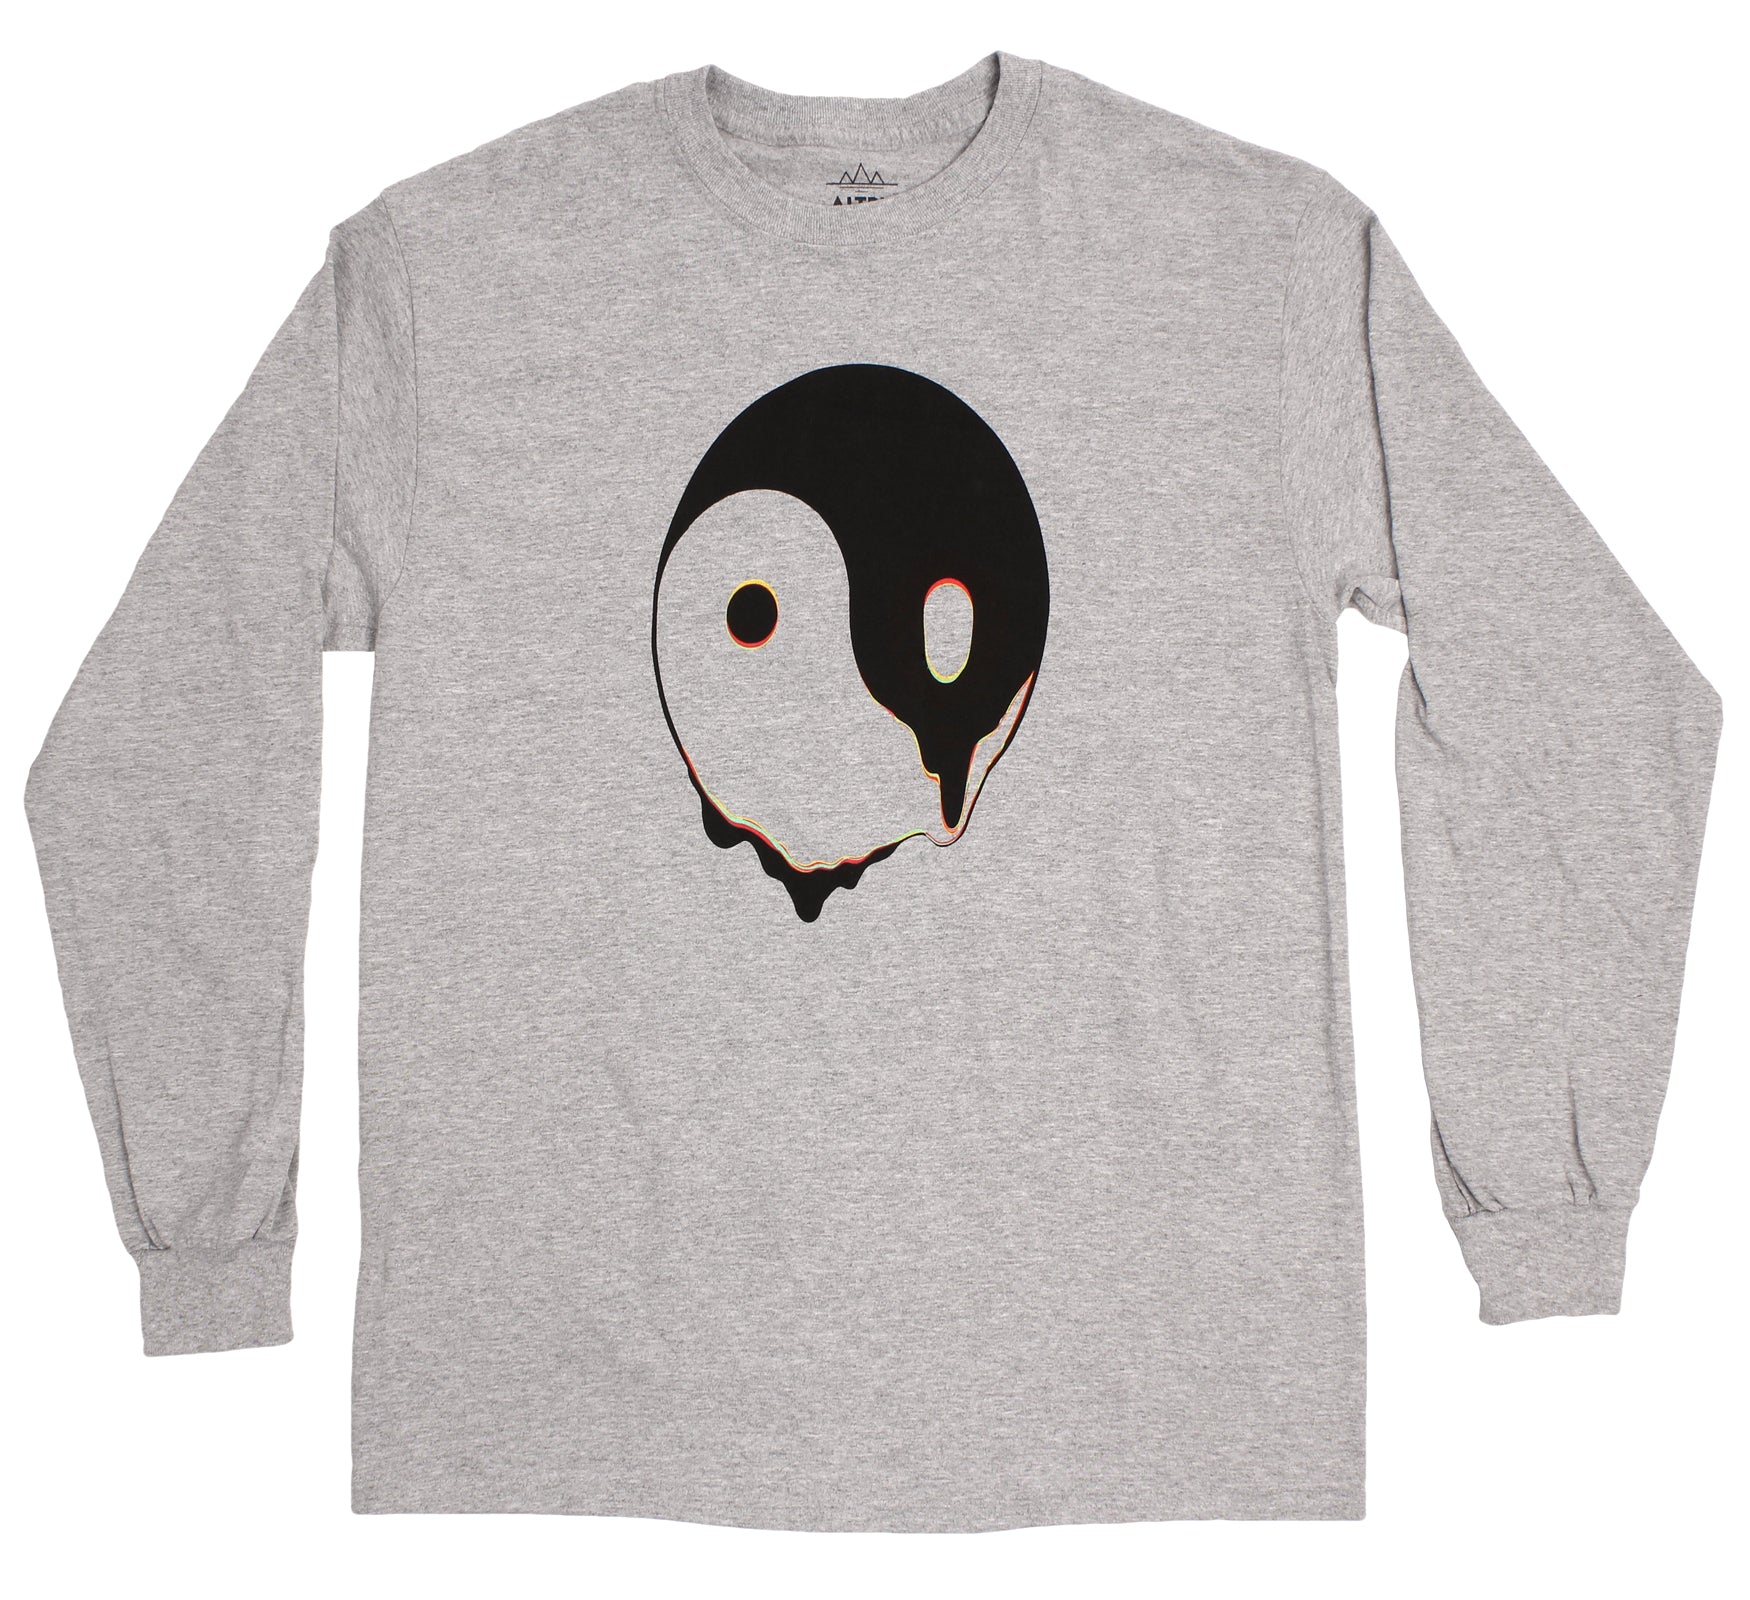 Melty Ying Yang L/S Gray T-Shirt by Altru Apparel